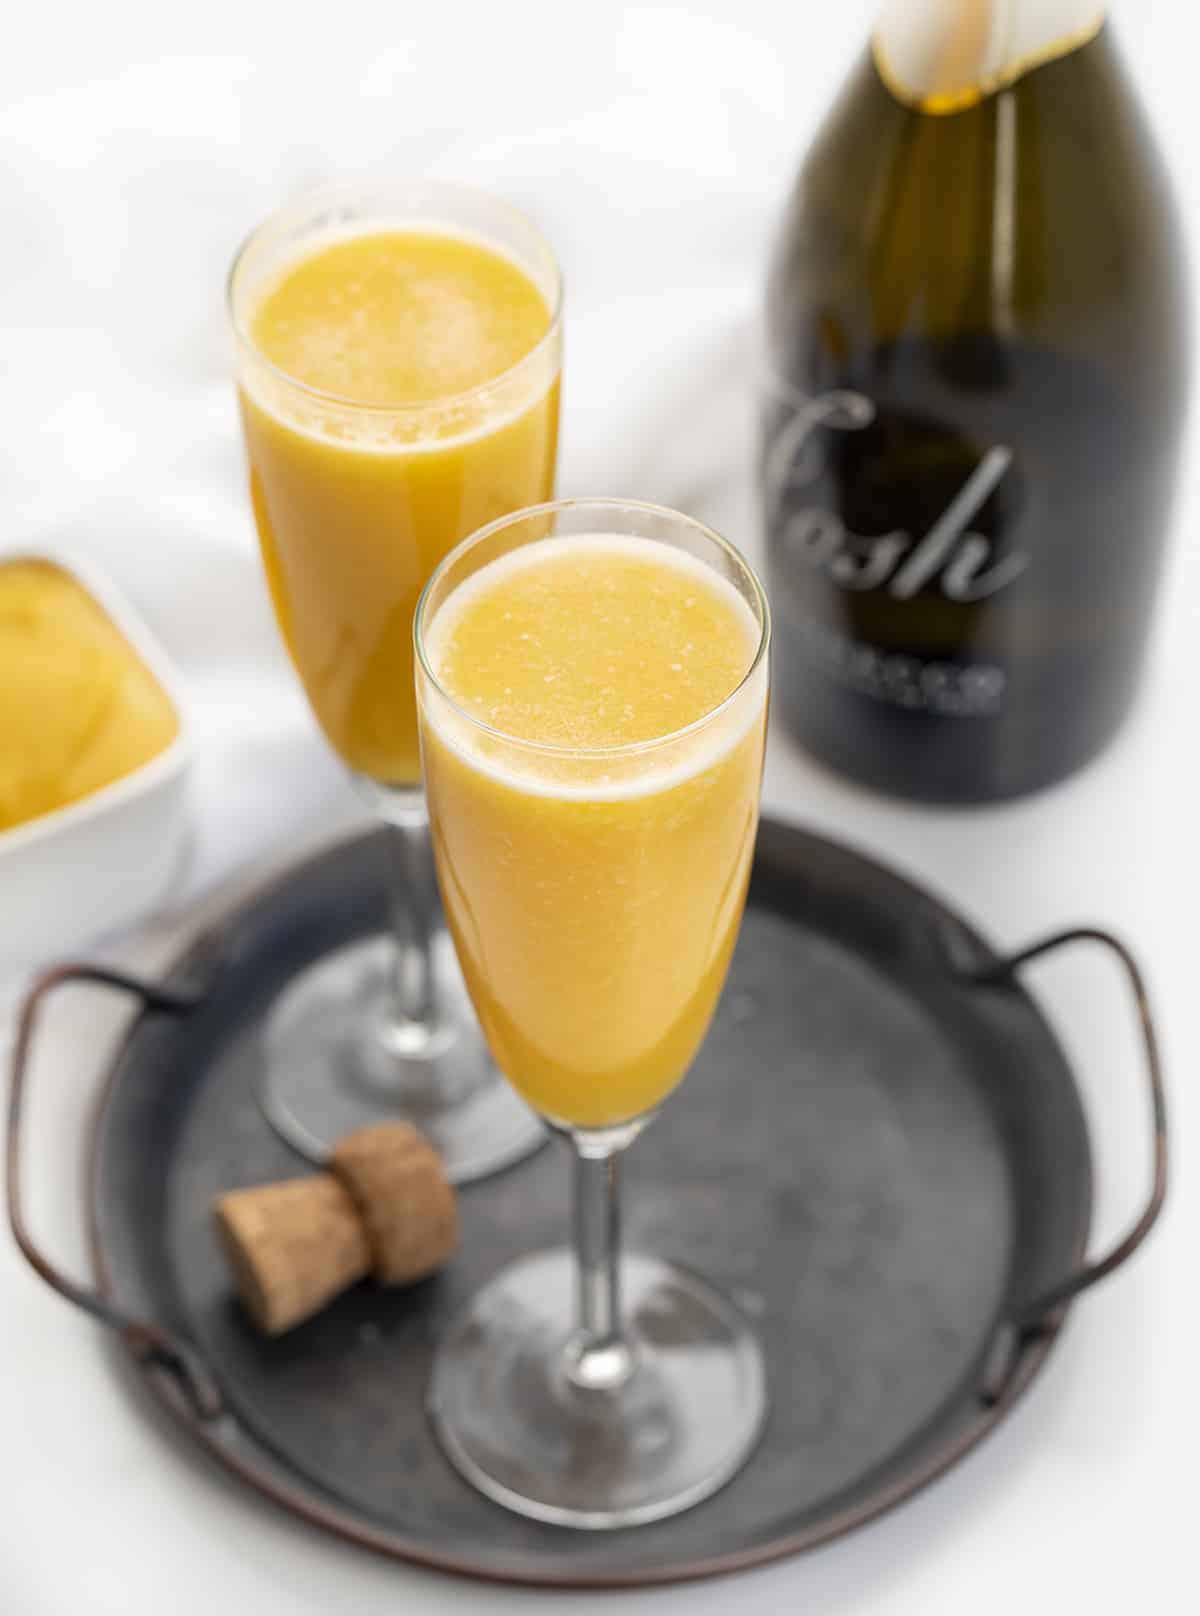 Glasses of Peach Bellini Cocktail with Prosecco Bottle.